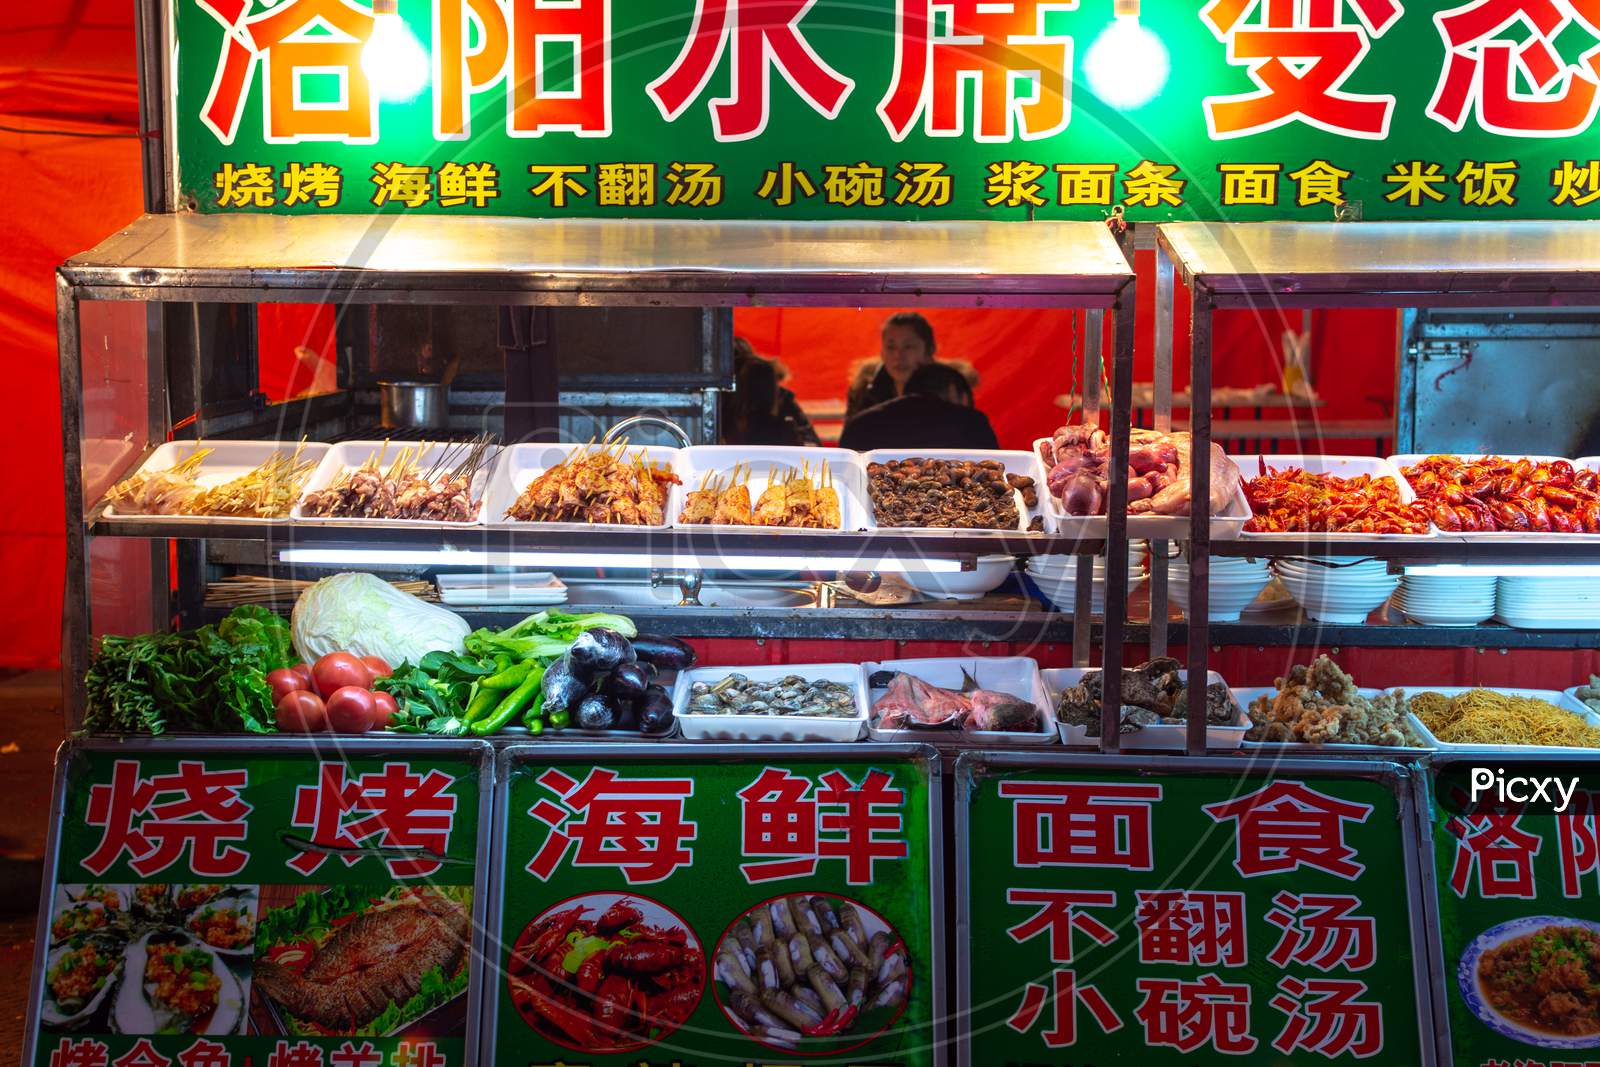 Street Market Food Stall In Luoyang Old City In Henan, China